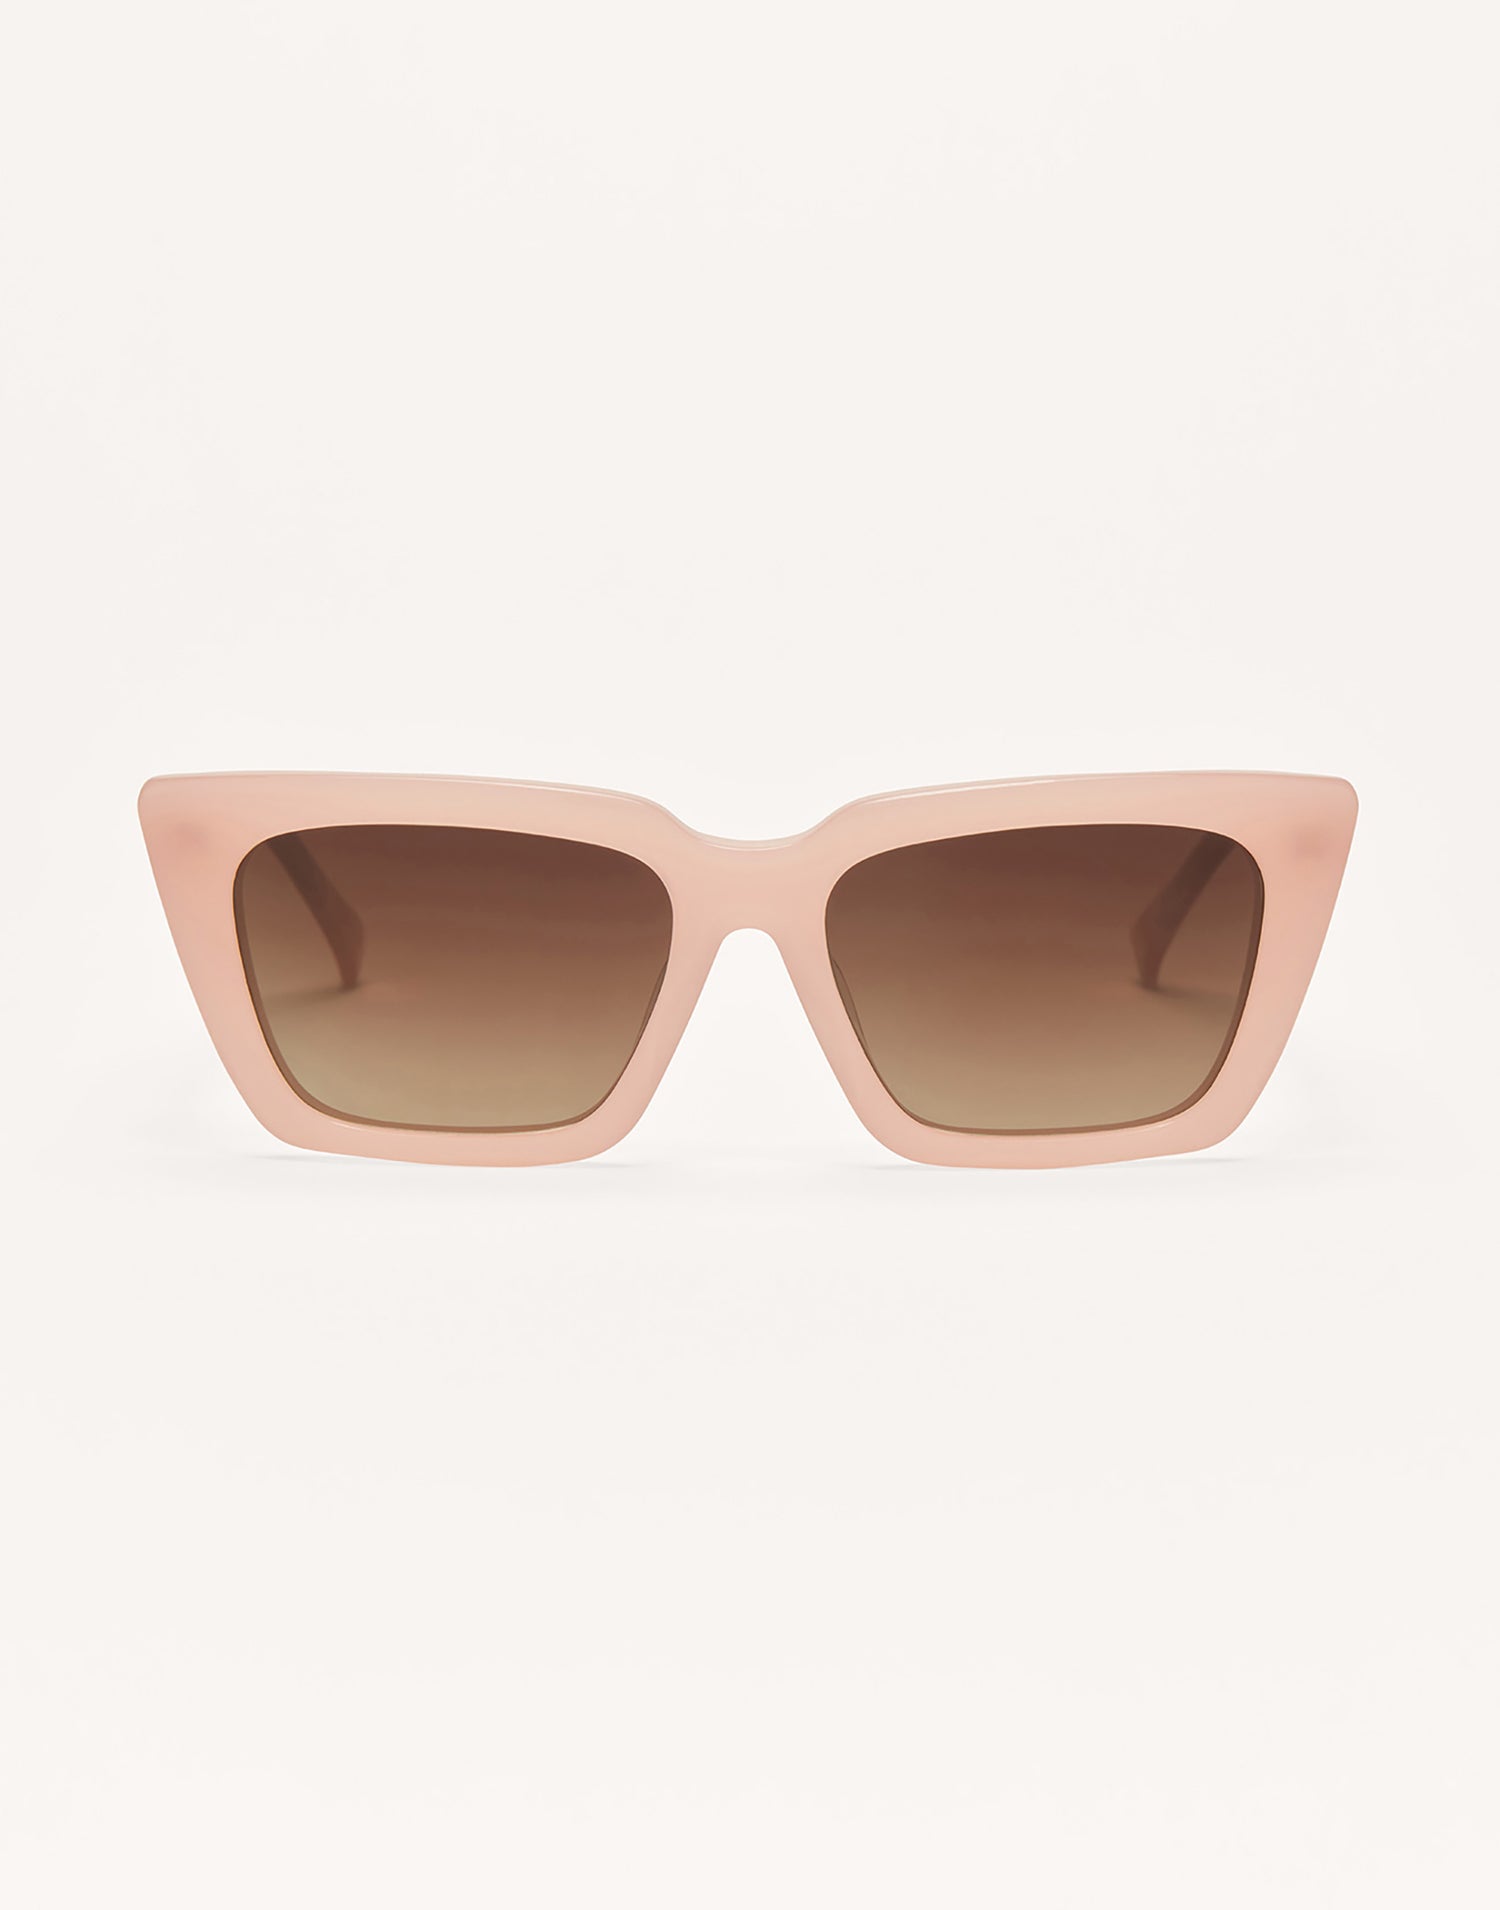 Feel Good Sunglasses by Z Supply in Blush Pink - Front View